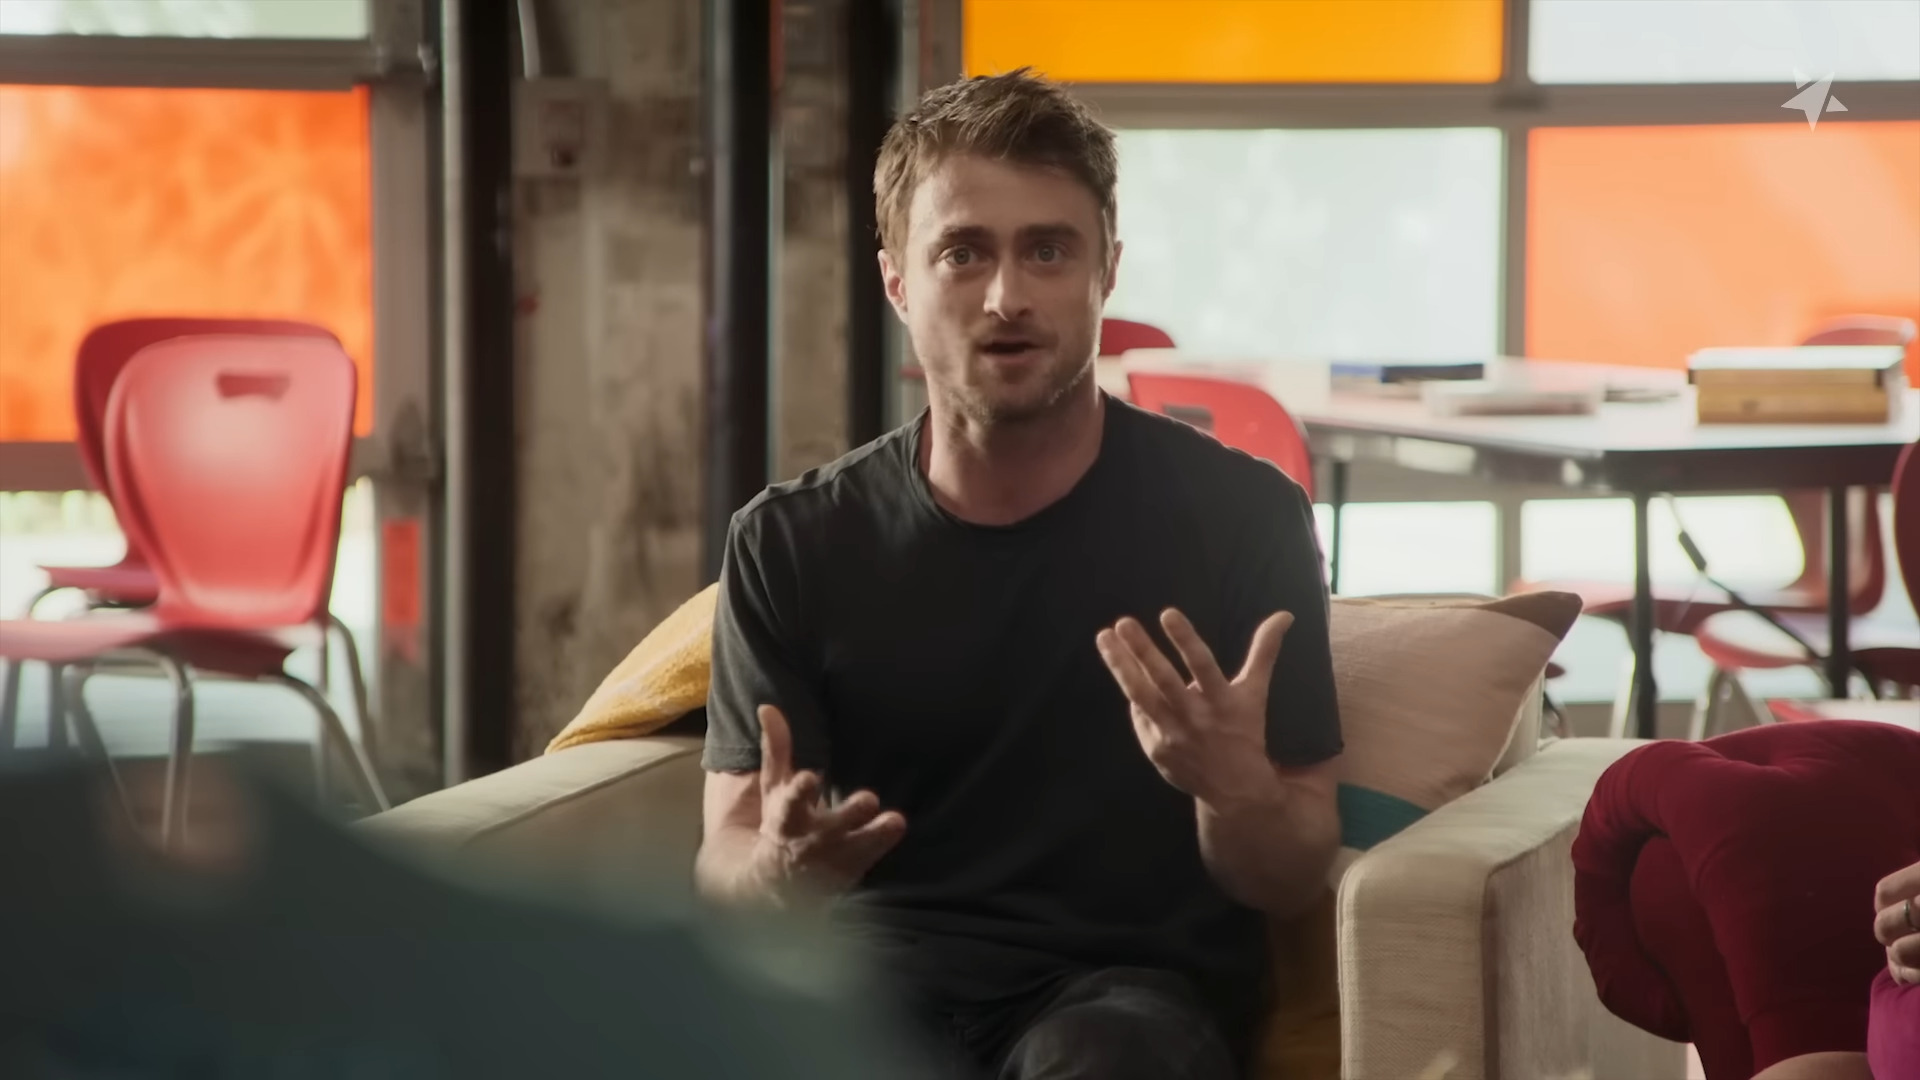 Daniel Radcliffe hosts a roundtable discussion in Sharing Space Episode 1 "Daniel Radcliffe" (2023), The Trevor Project